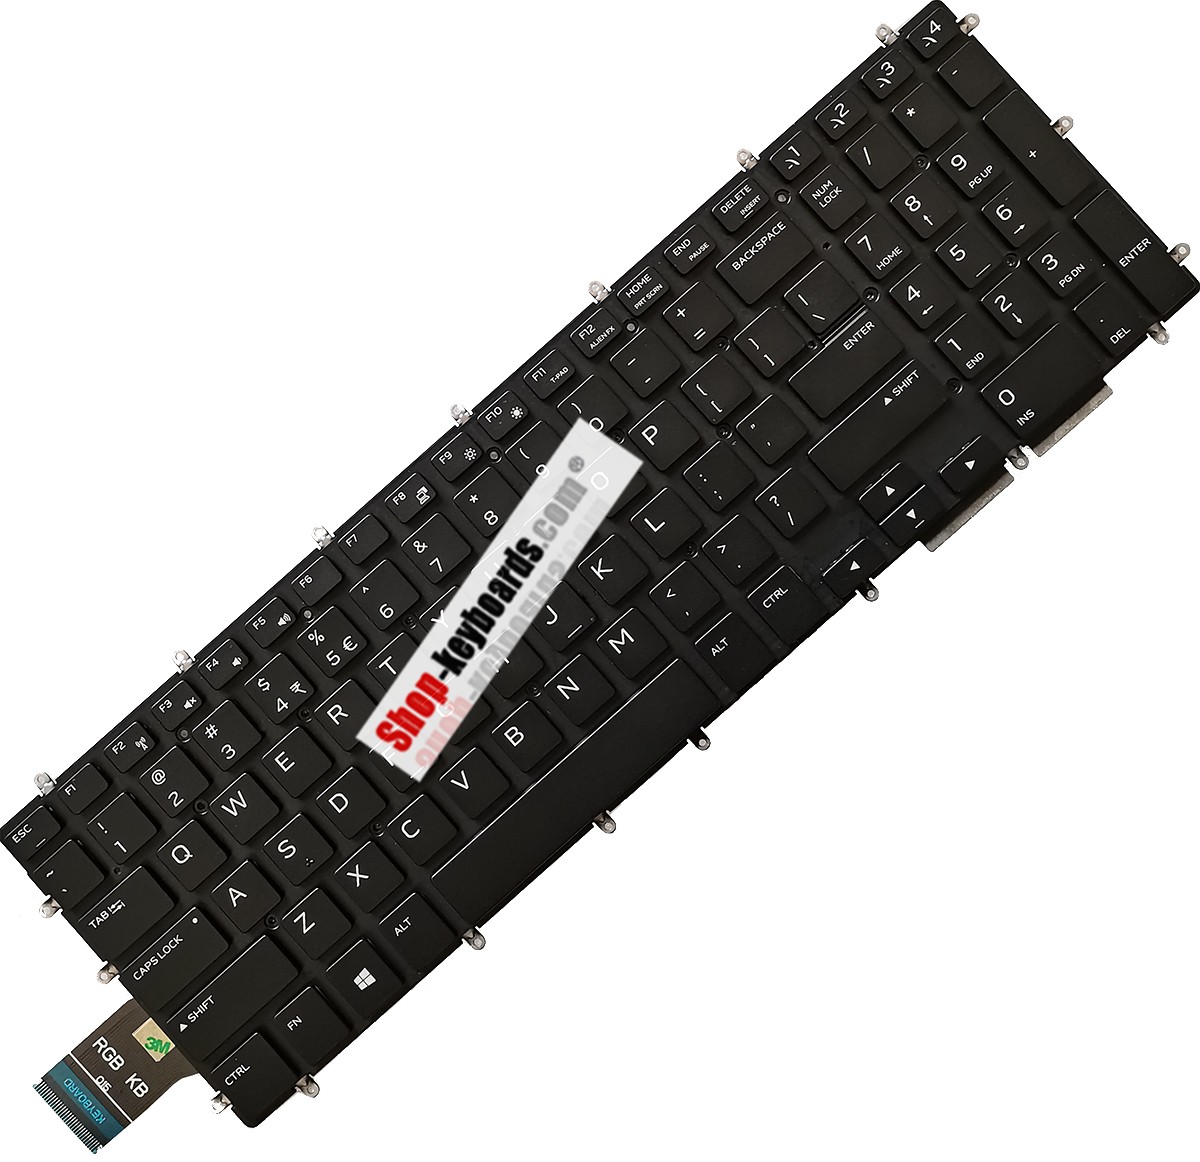 Dell 0KN4-0H1IT16 Keyboard replacement